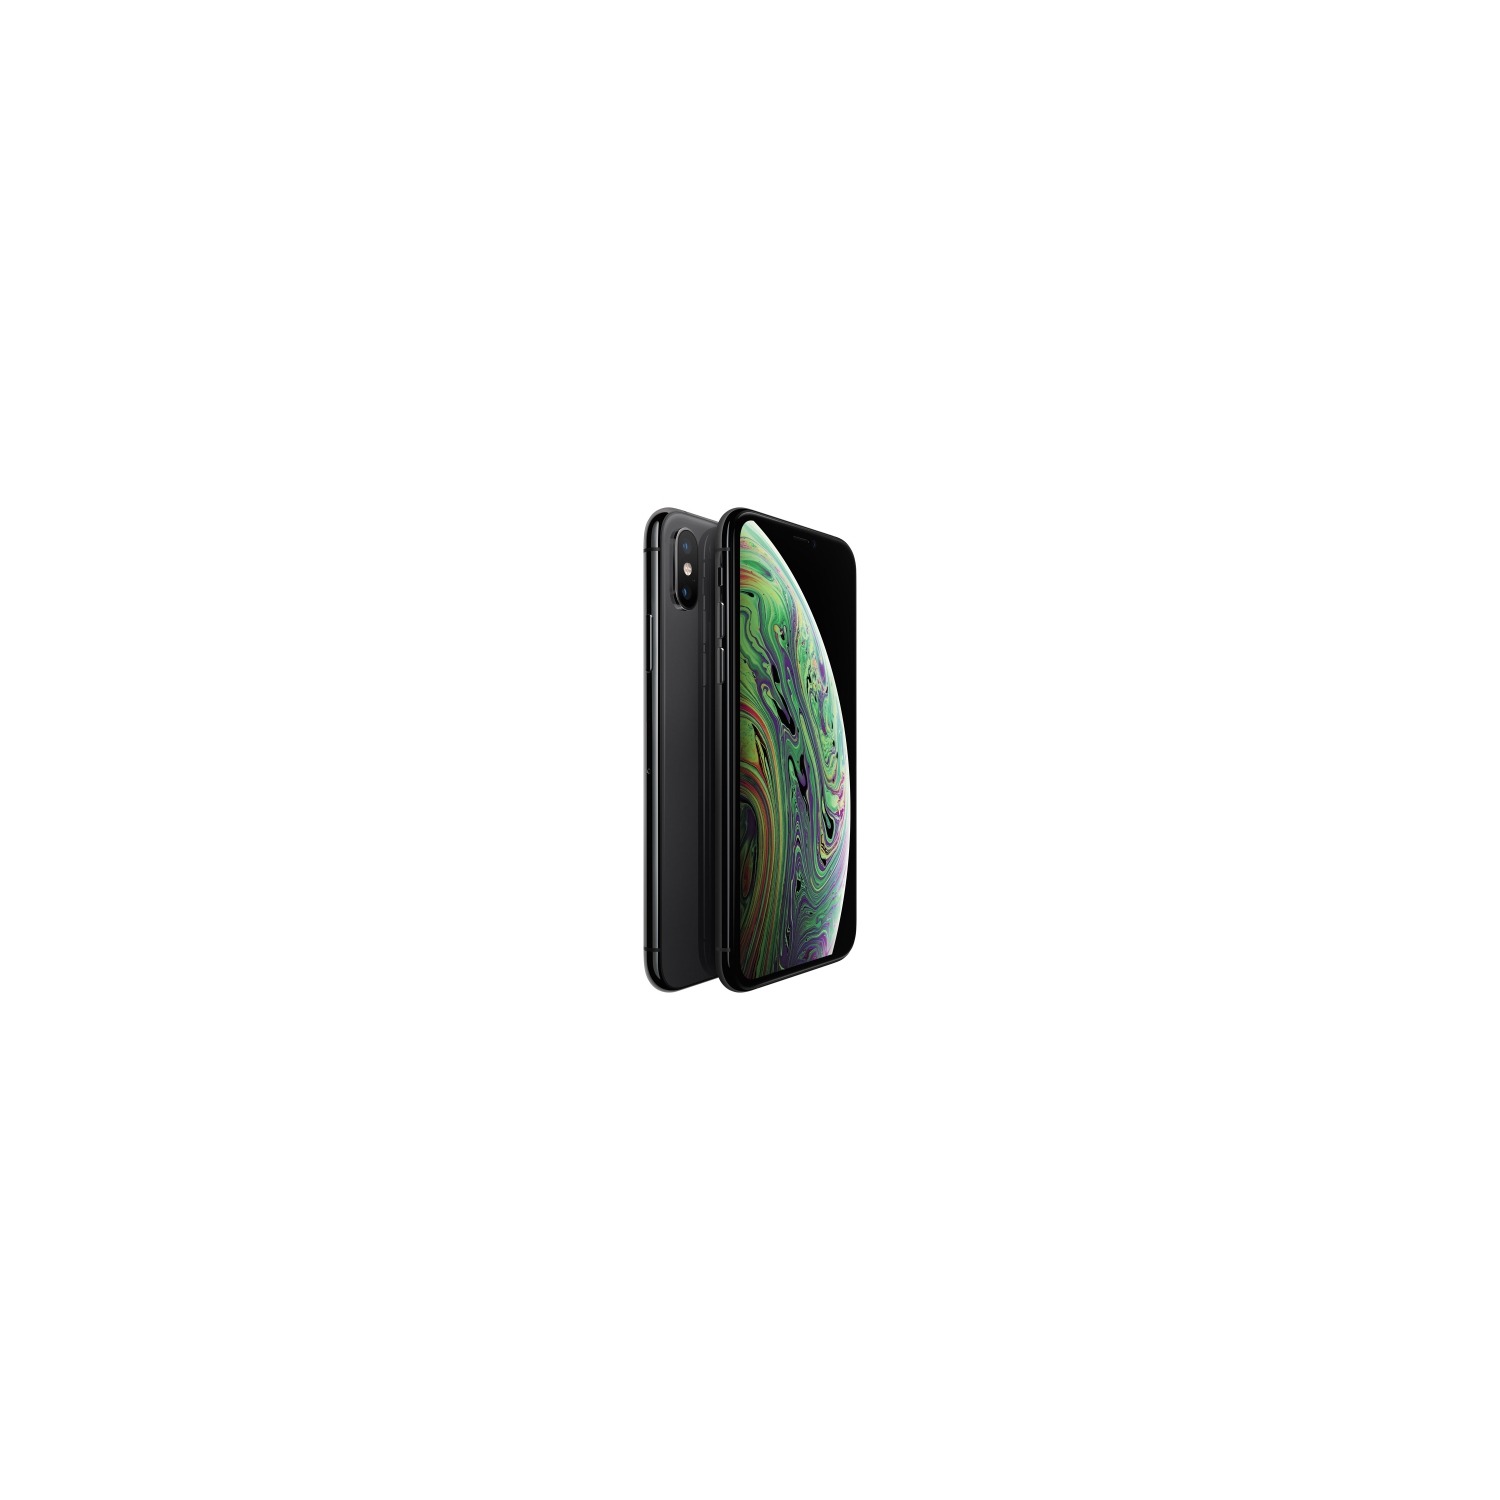 Refurbished (Excellent) - Apple iPhone XS Max | 64GB - Smartphone - Space Grey - Unlocked - Certified Refurbished